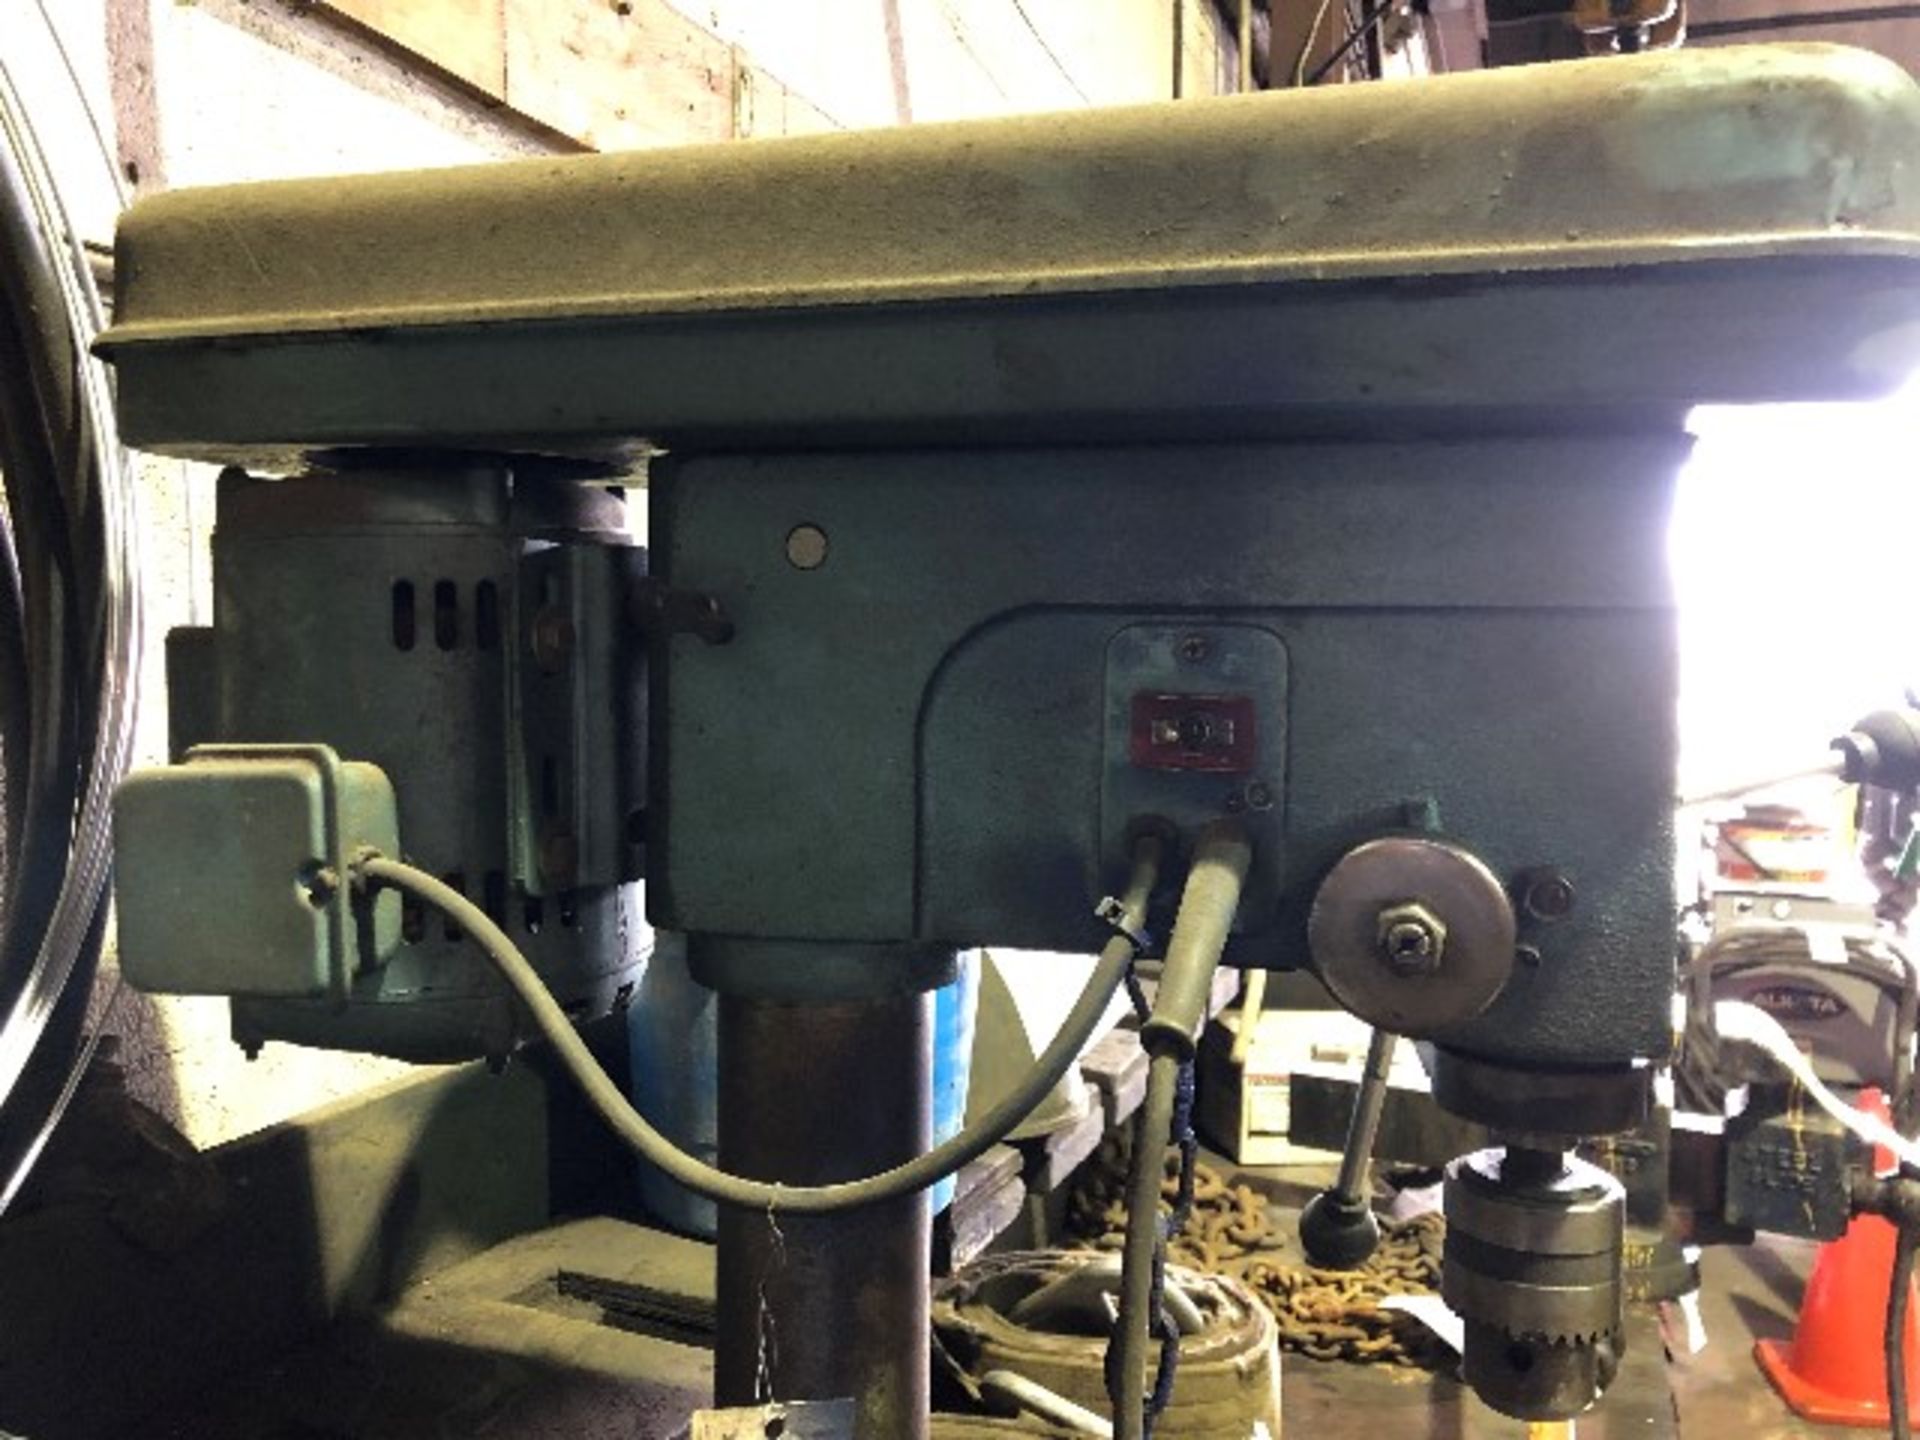 Busy Bee drill press, model:B842, 115V, 12A - Image 4 of 4